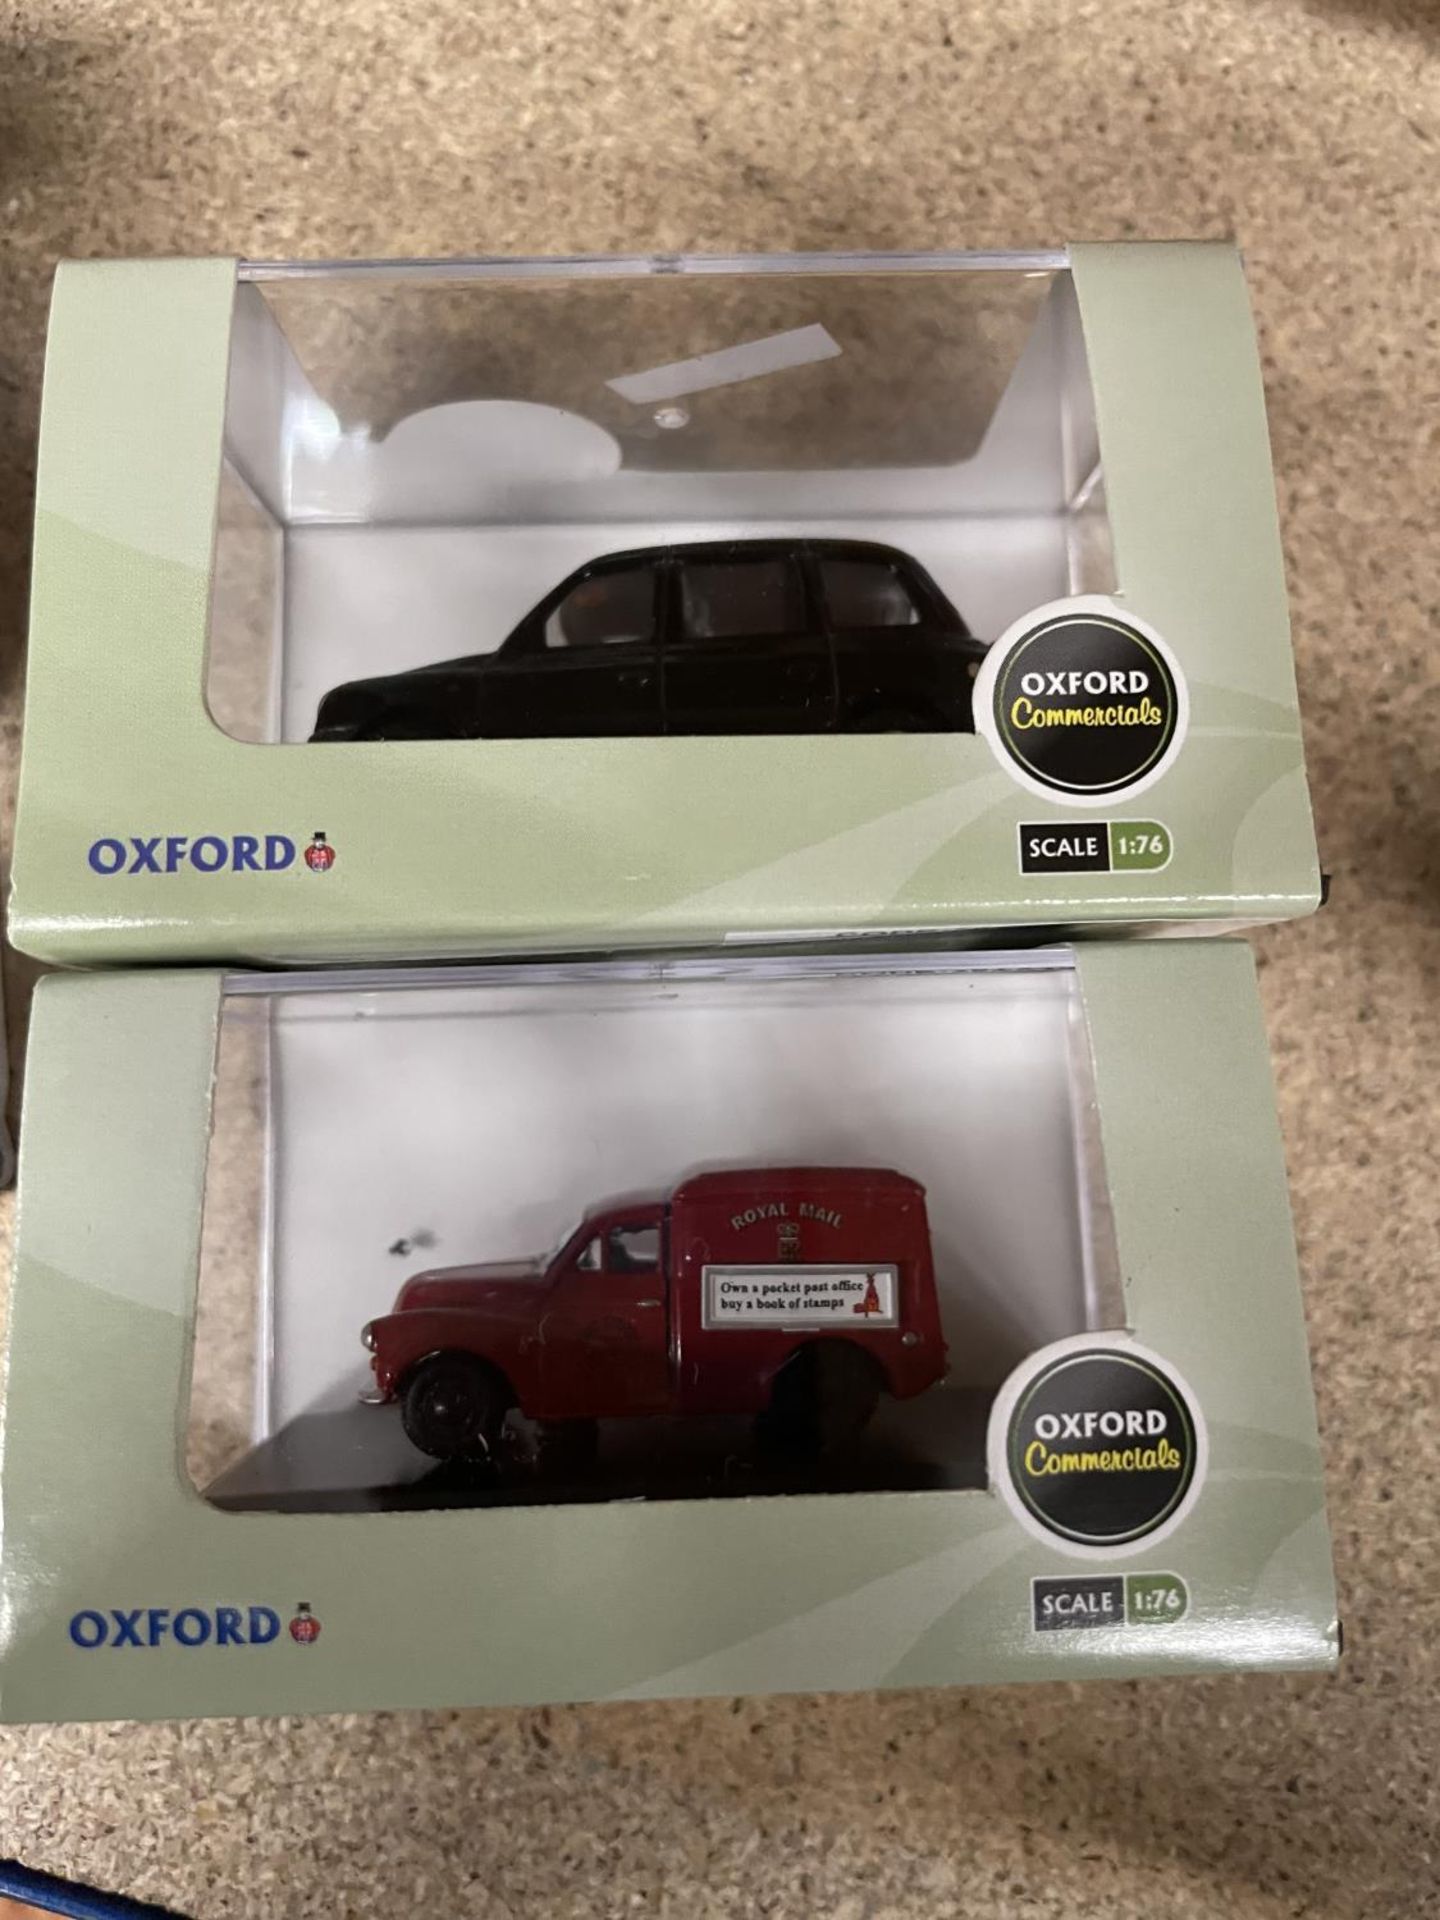 SIX AS NEW AND BOXED OXFORD COMMERCIAL VEHICLES - Image 3 of 4